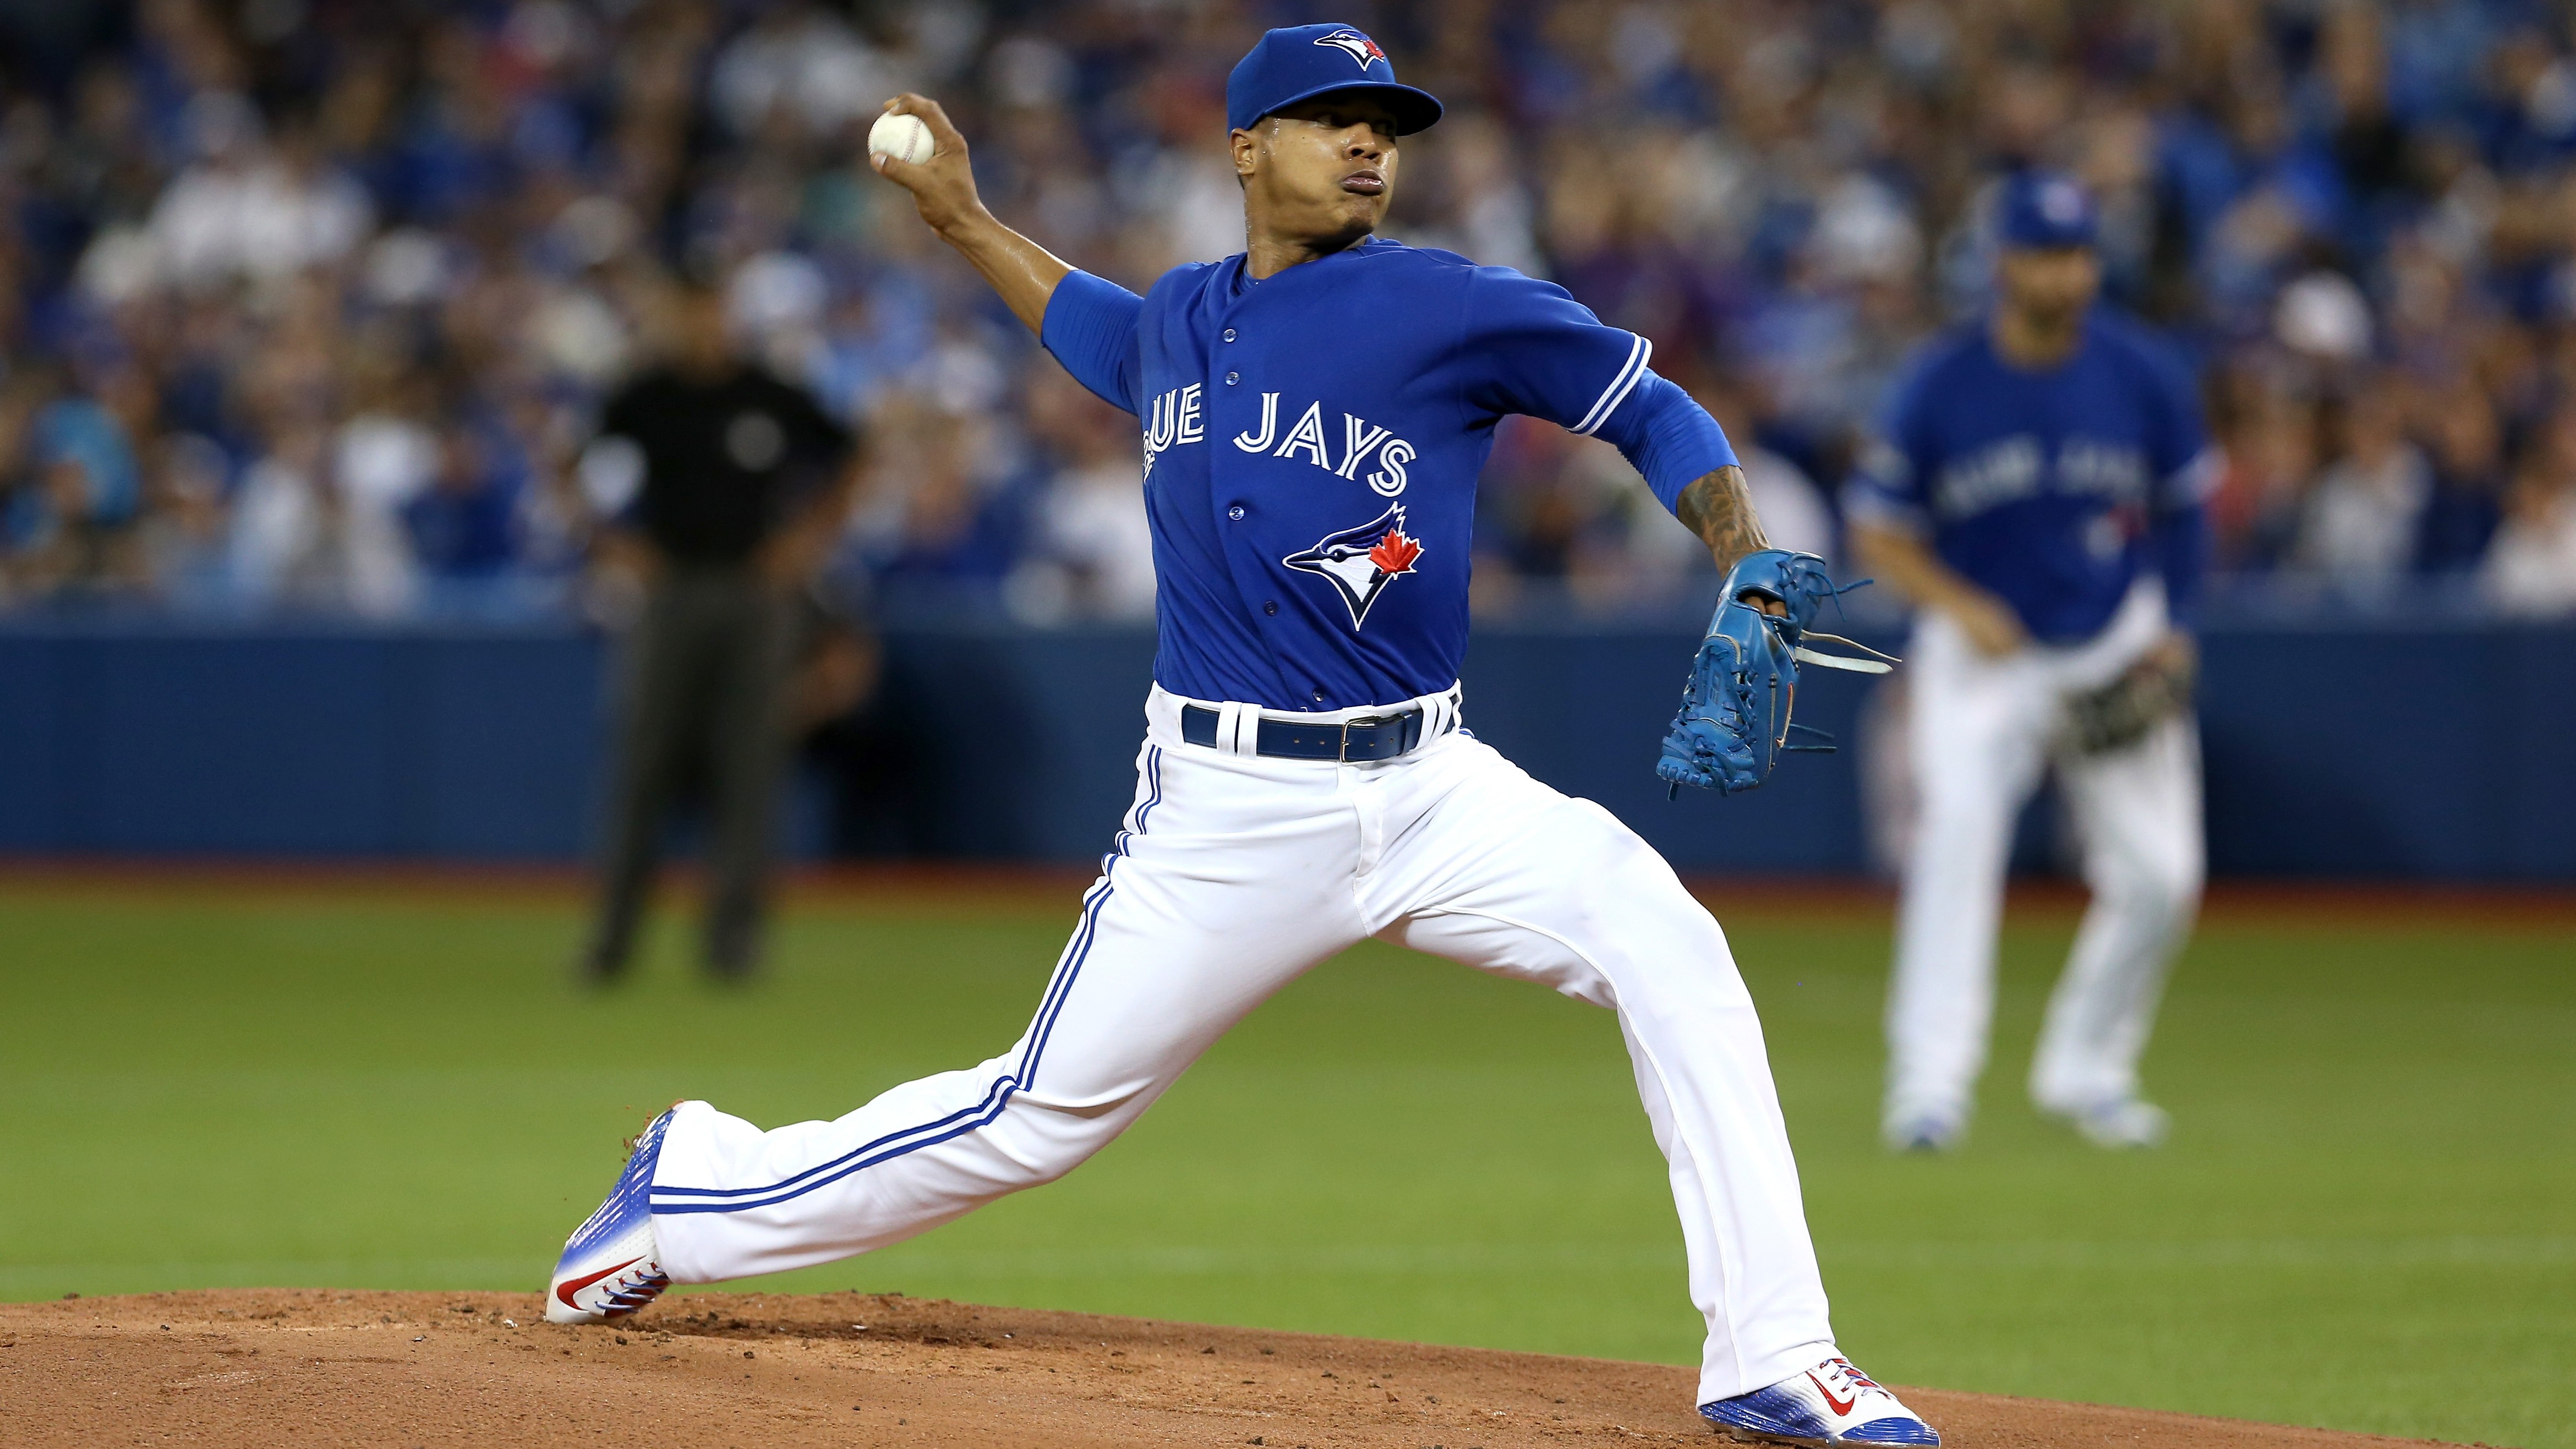 Marcus Stroman set for do-or-die Game 5 as Jays face Rangers